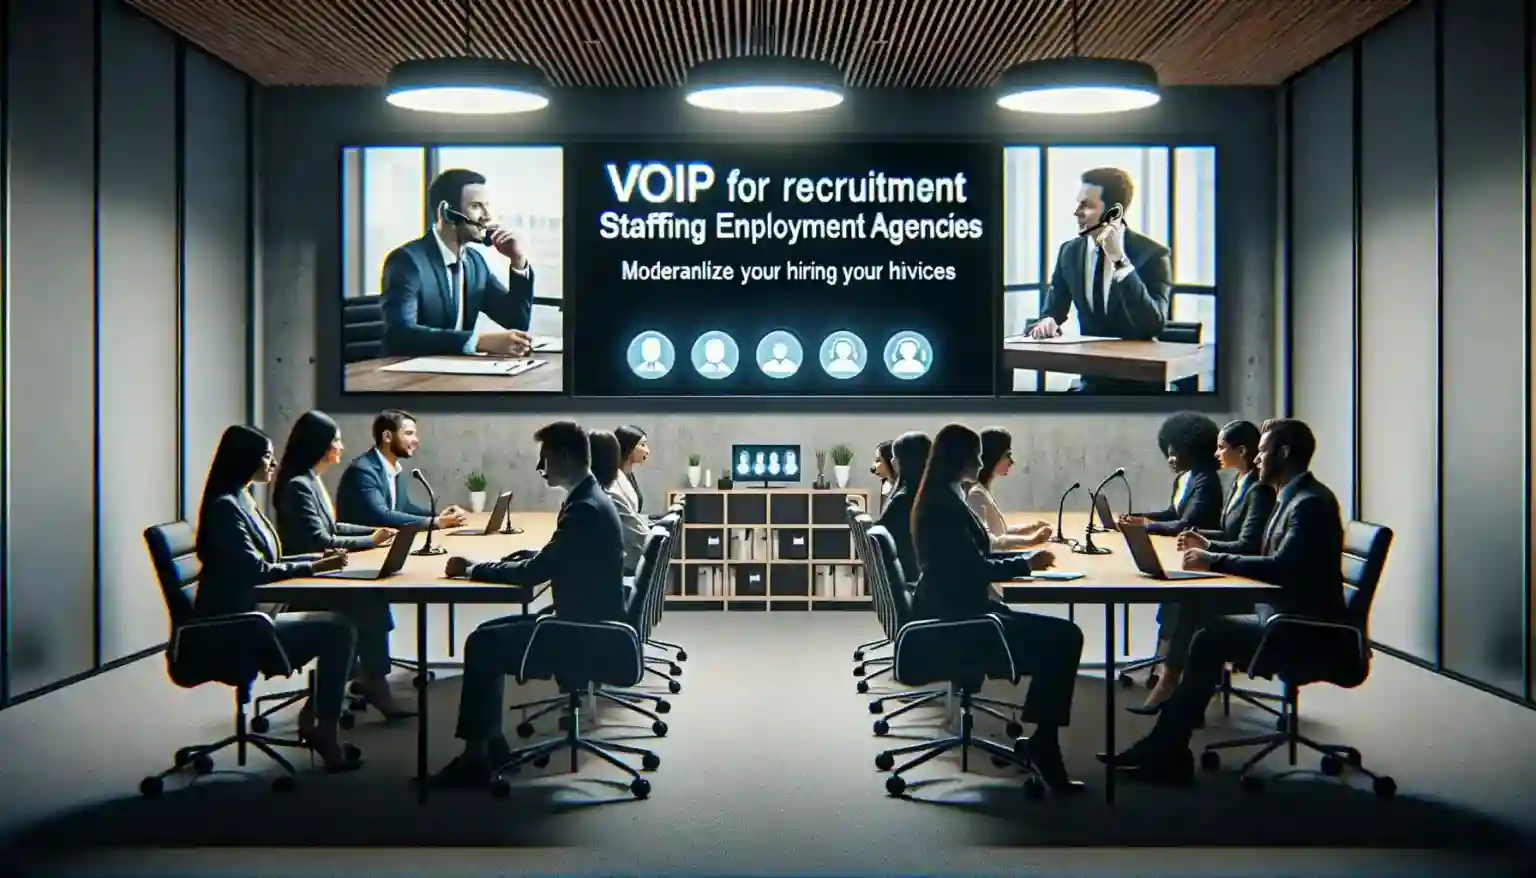 VoIP Is able to help streamline the hiring process